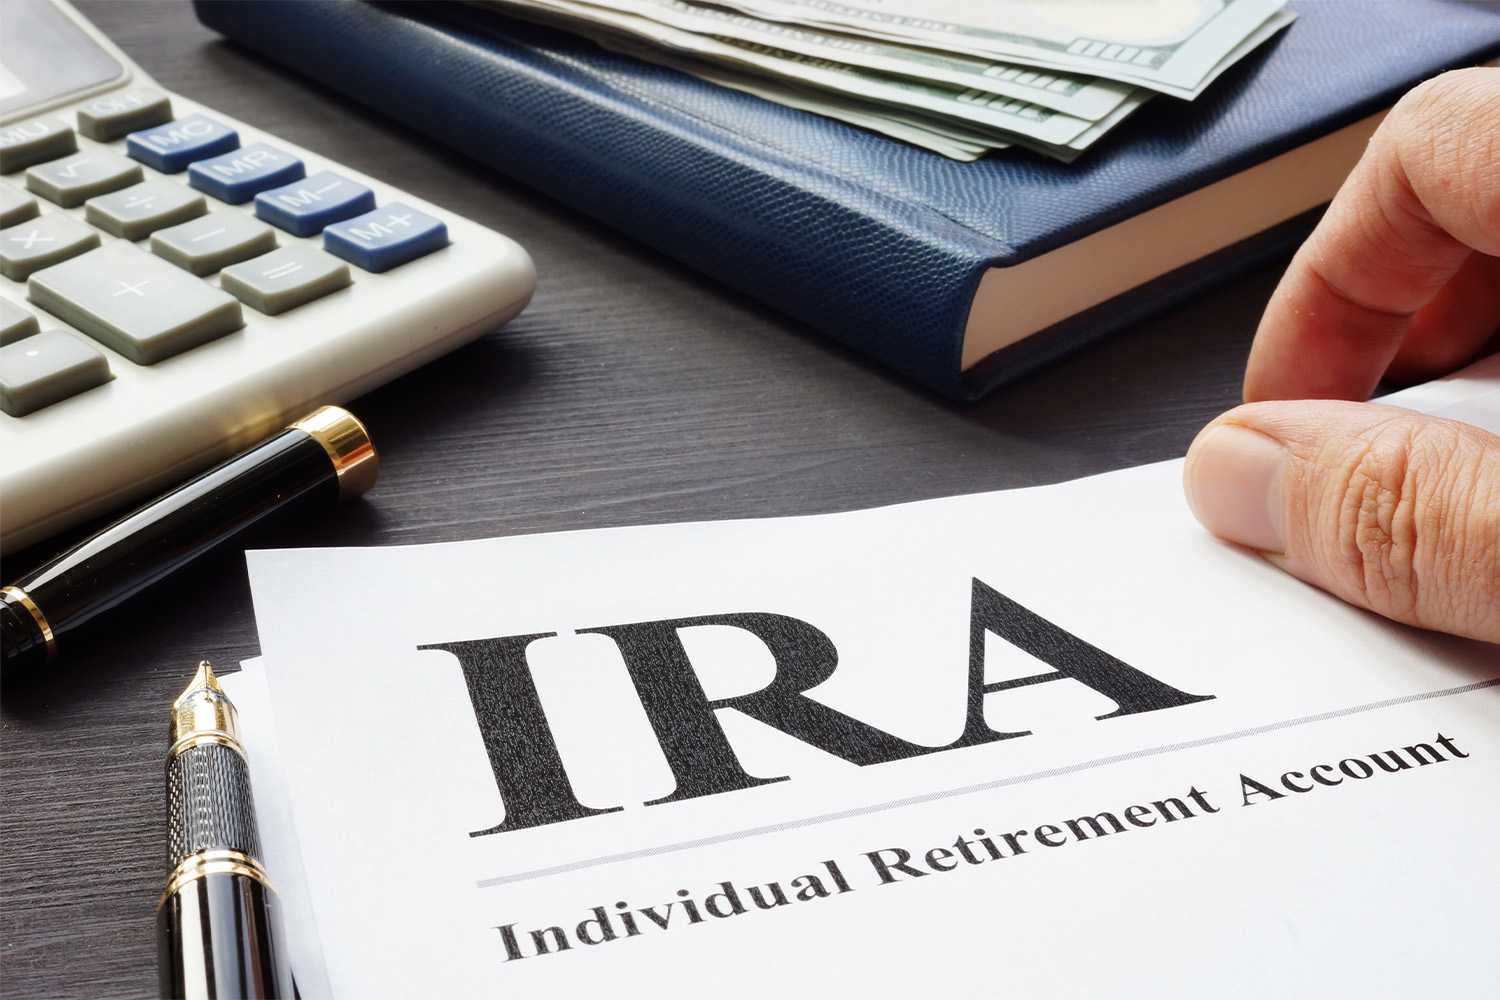 What Are the Benefits of Self-Directed IRAs in Real Estate?